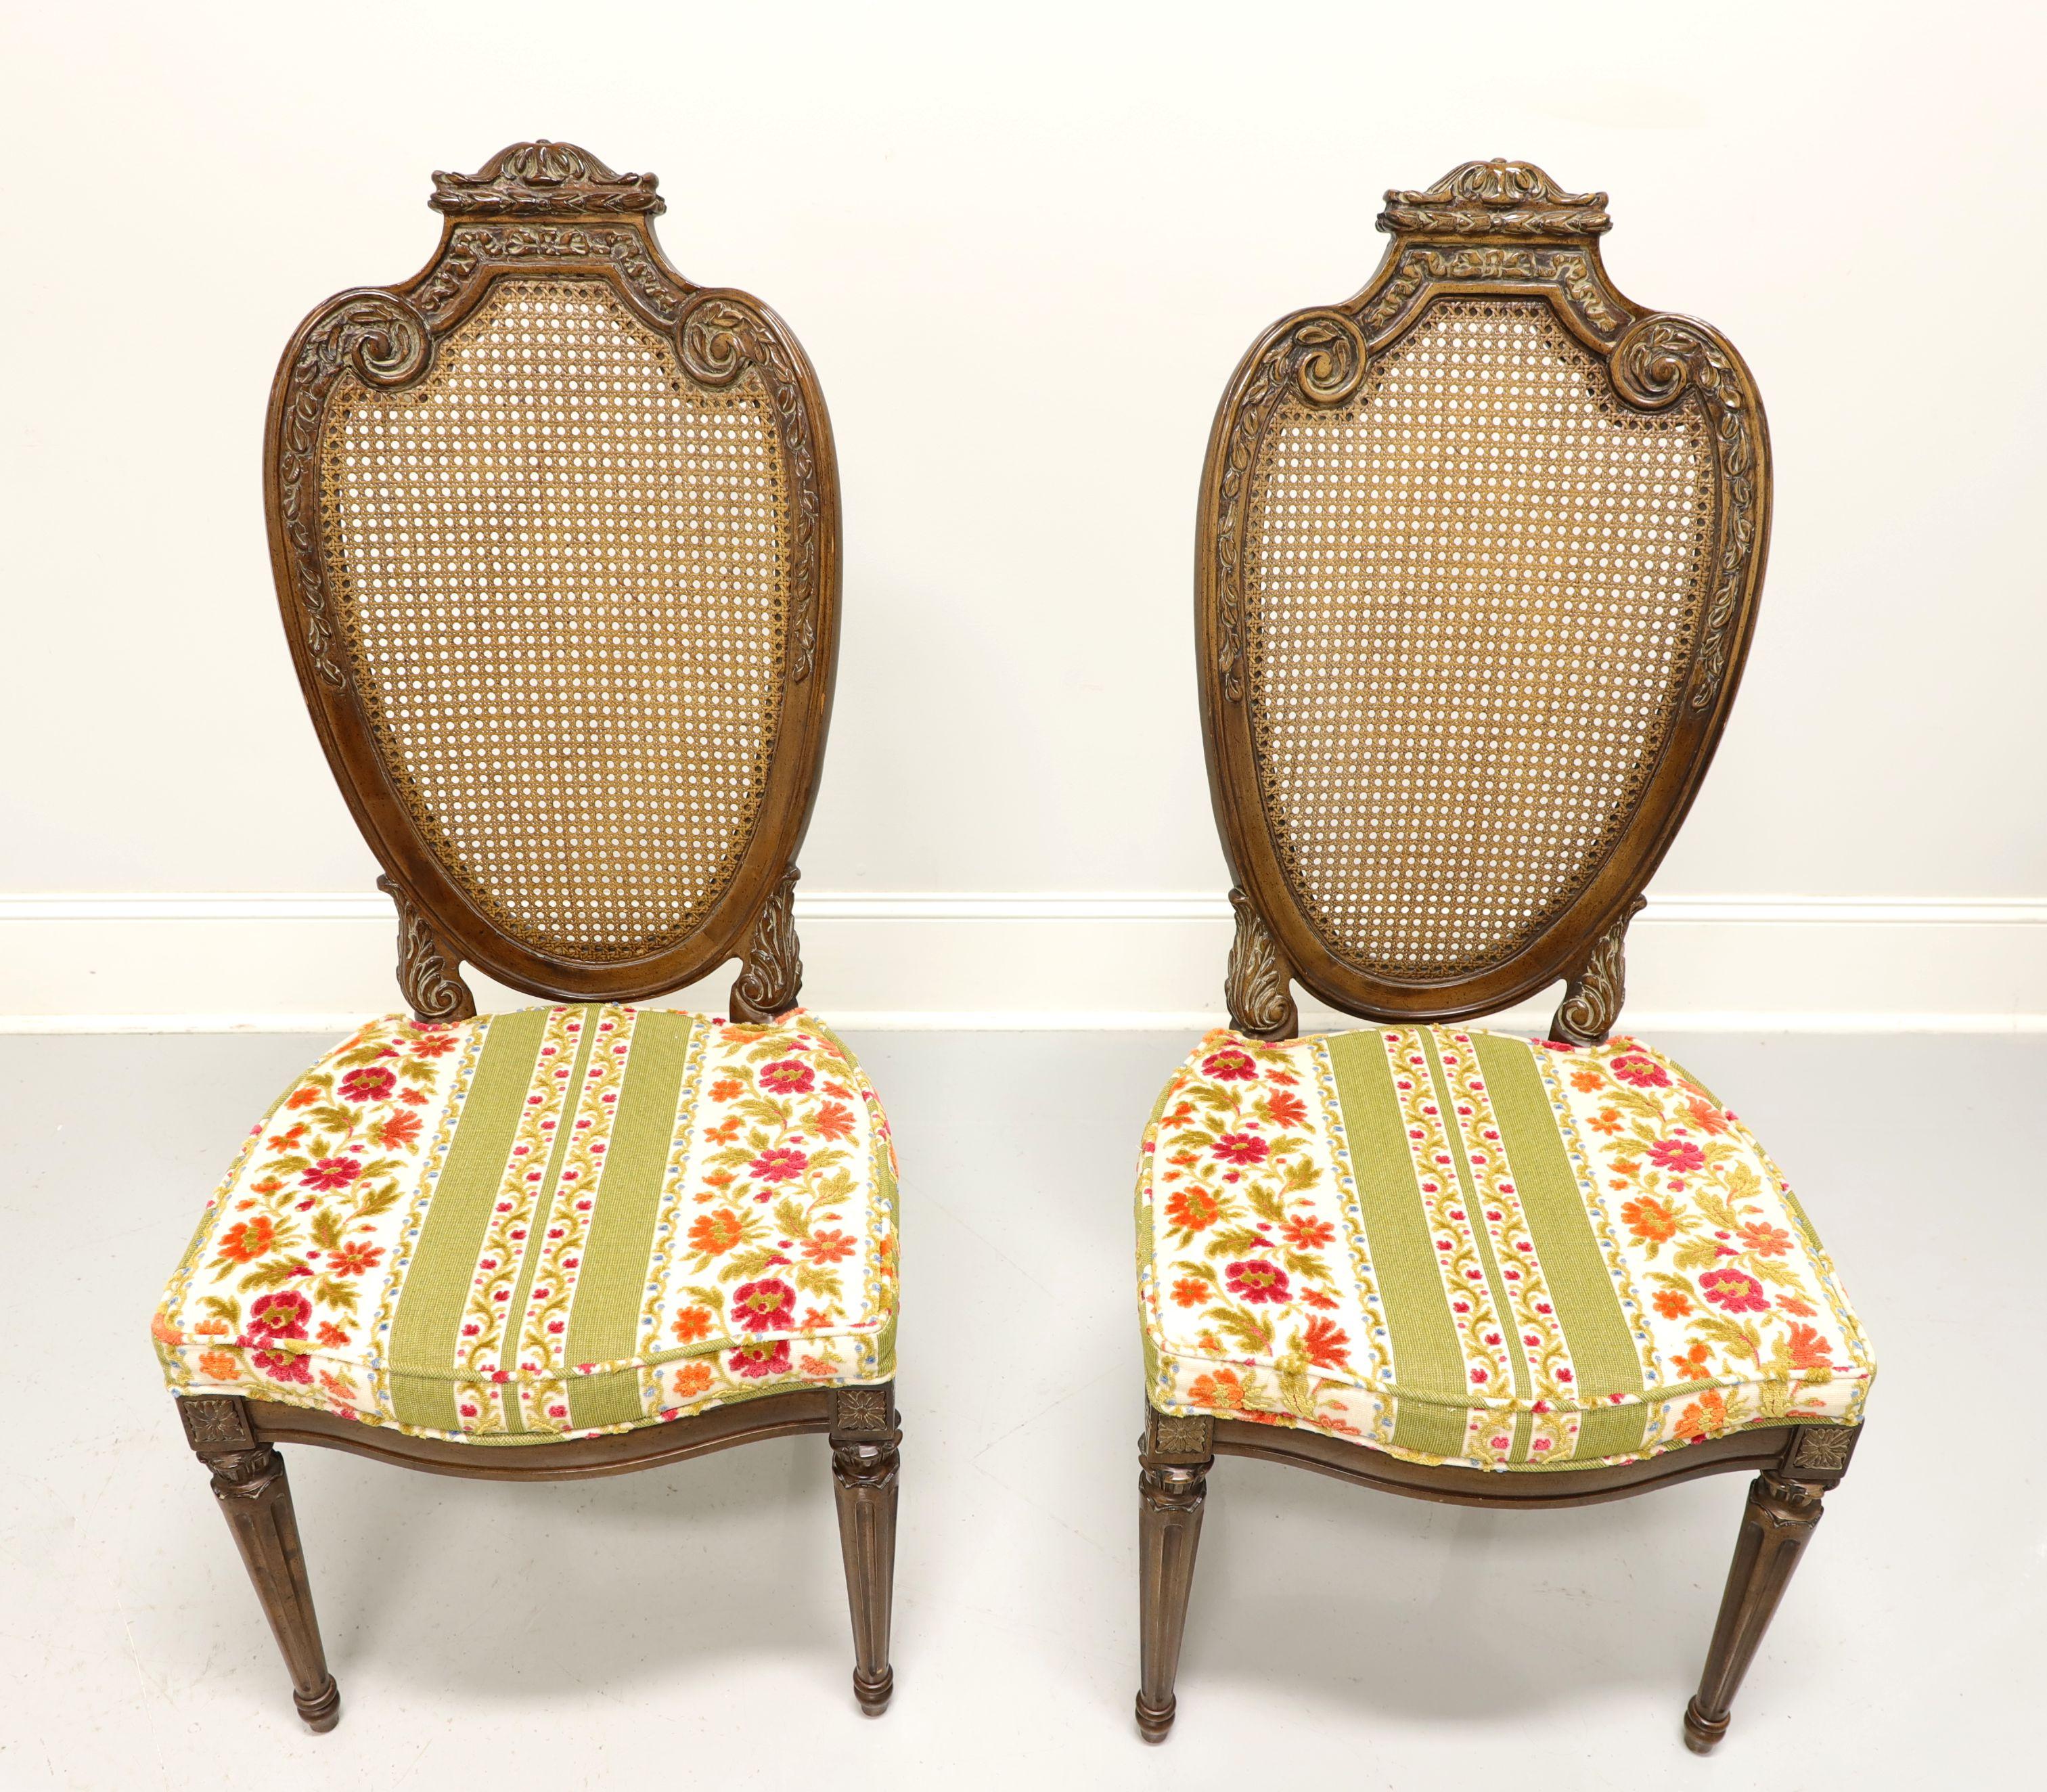 A pair of French Provincial Louis XVI style dining side chairs by Hellam. Walnut, slightly distressed, with caned decoratively carved oval shield like backs, floral brocade fabric upholstered seats, carved apron, turned and fluted front legs. Made